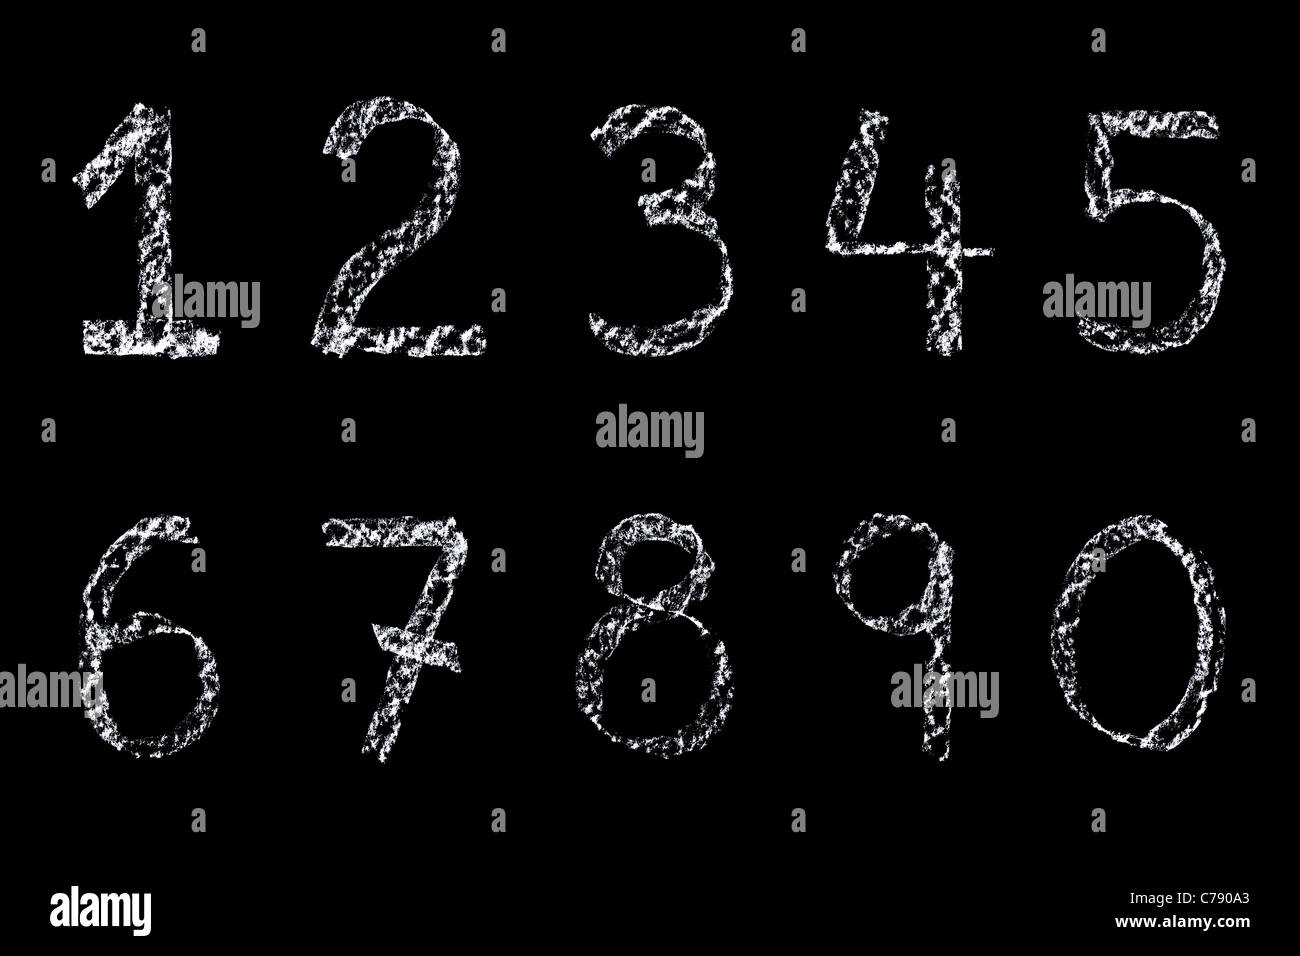 Handwritten numbers written on a blackboard in white chalk then cleaned up during editing and placed on a black background. Stock Photo